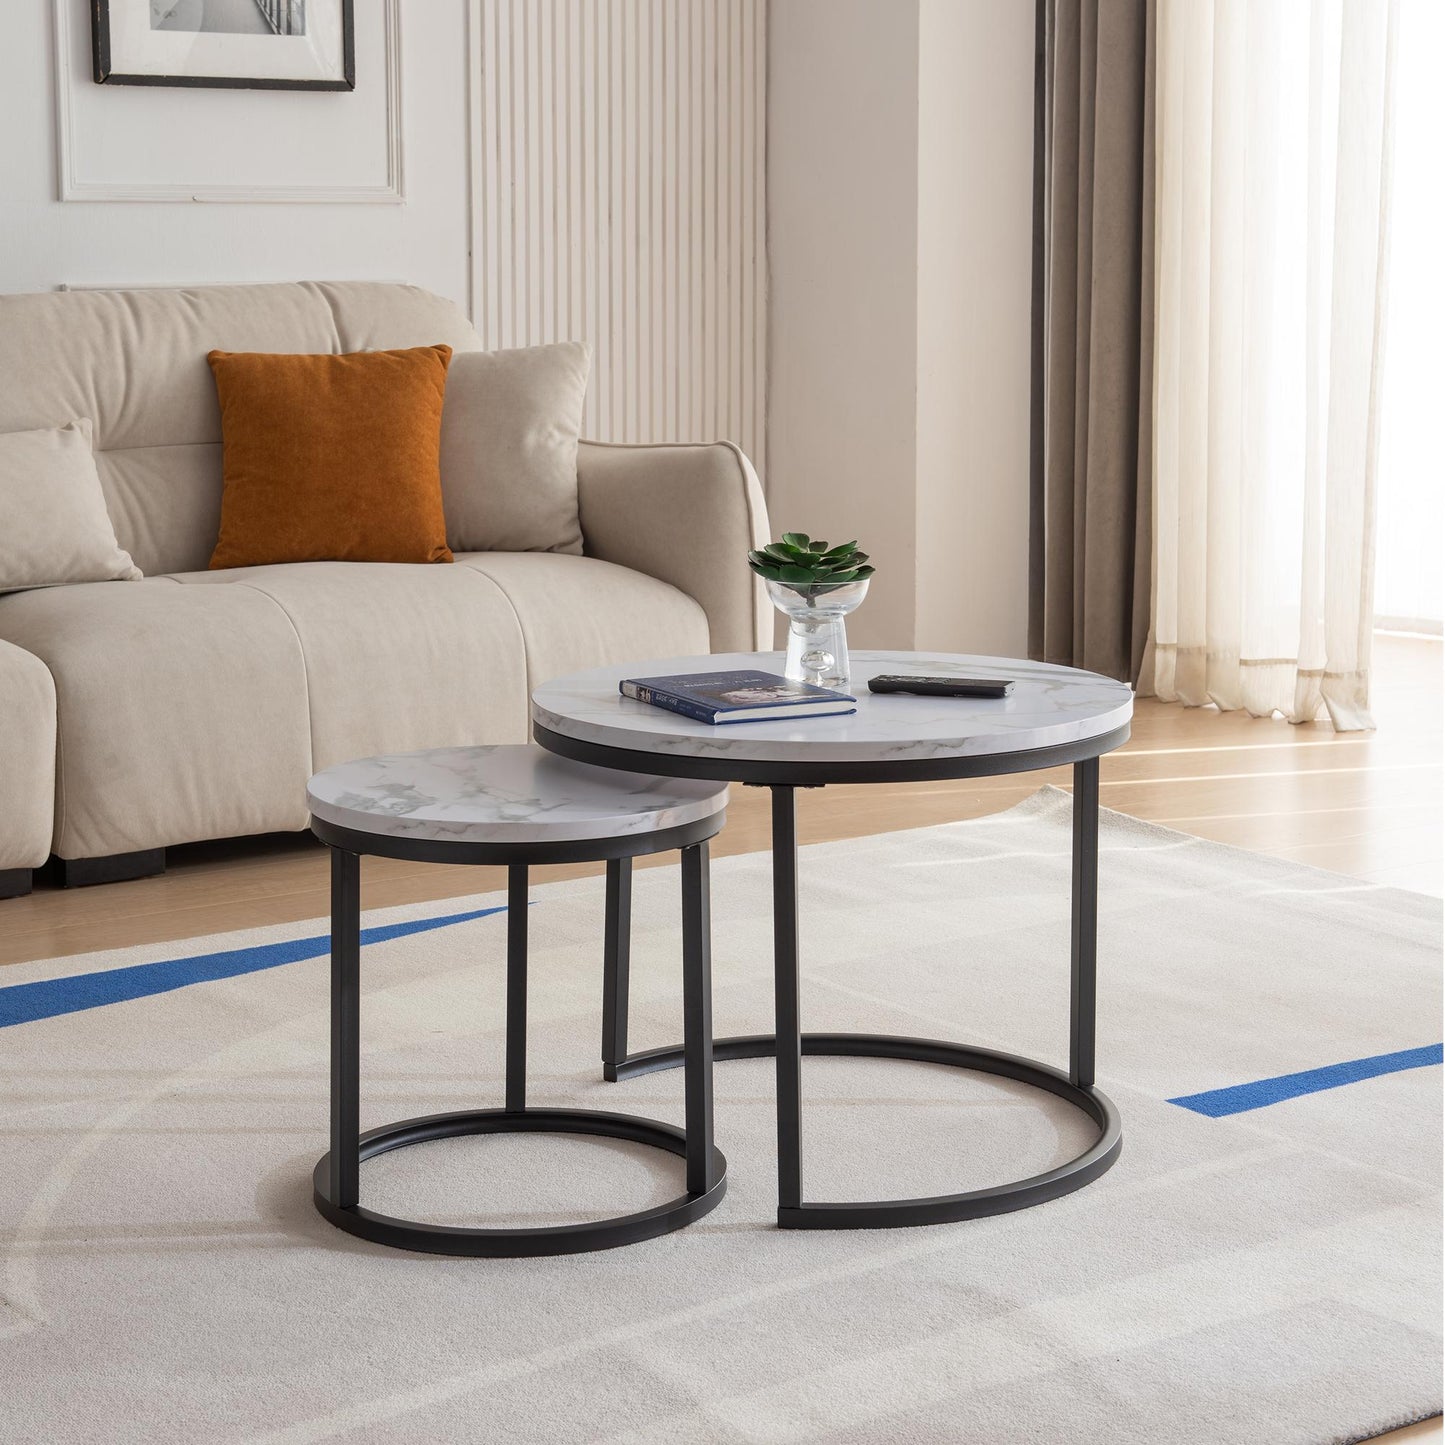 Modern Nesting coffee table,Black metal frame with marble color top-23.6”